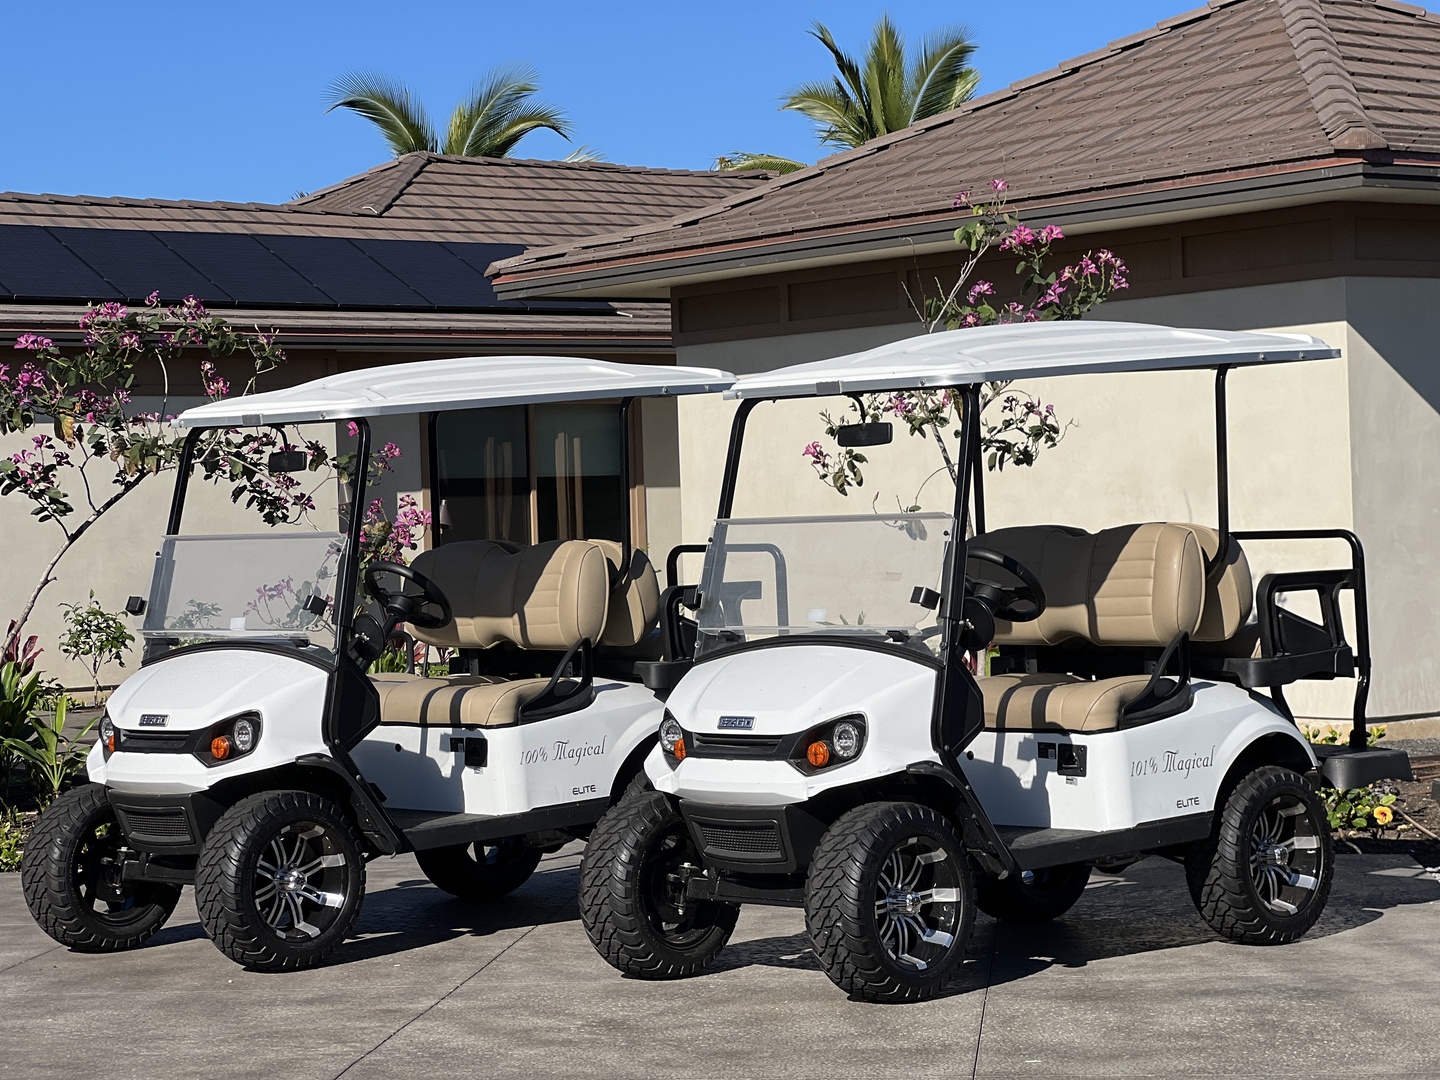 Kailua Kona Vacation Rentals, 4BR Luxury Puka Pa Estate (1201) at Four Seasons Resort at Hualalai - Two golf carts, each with seating for four are included for guests!